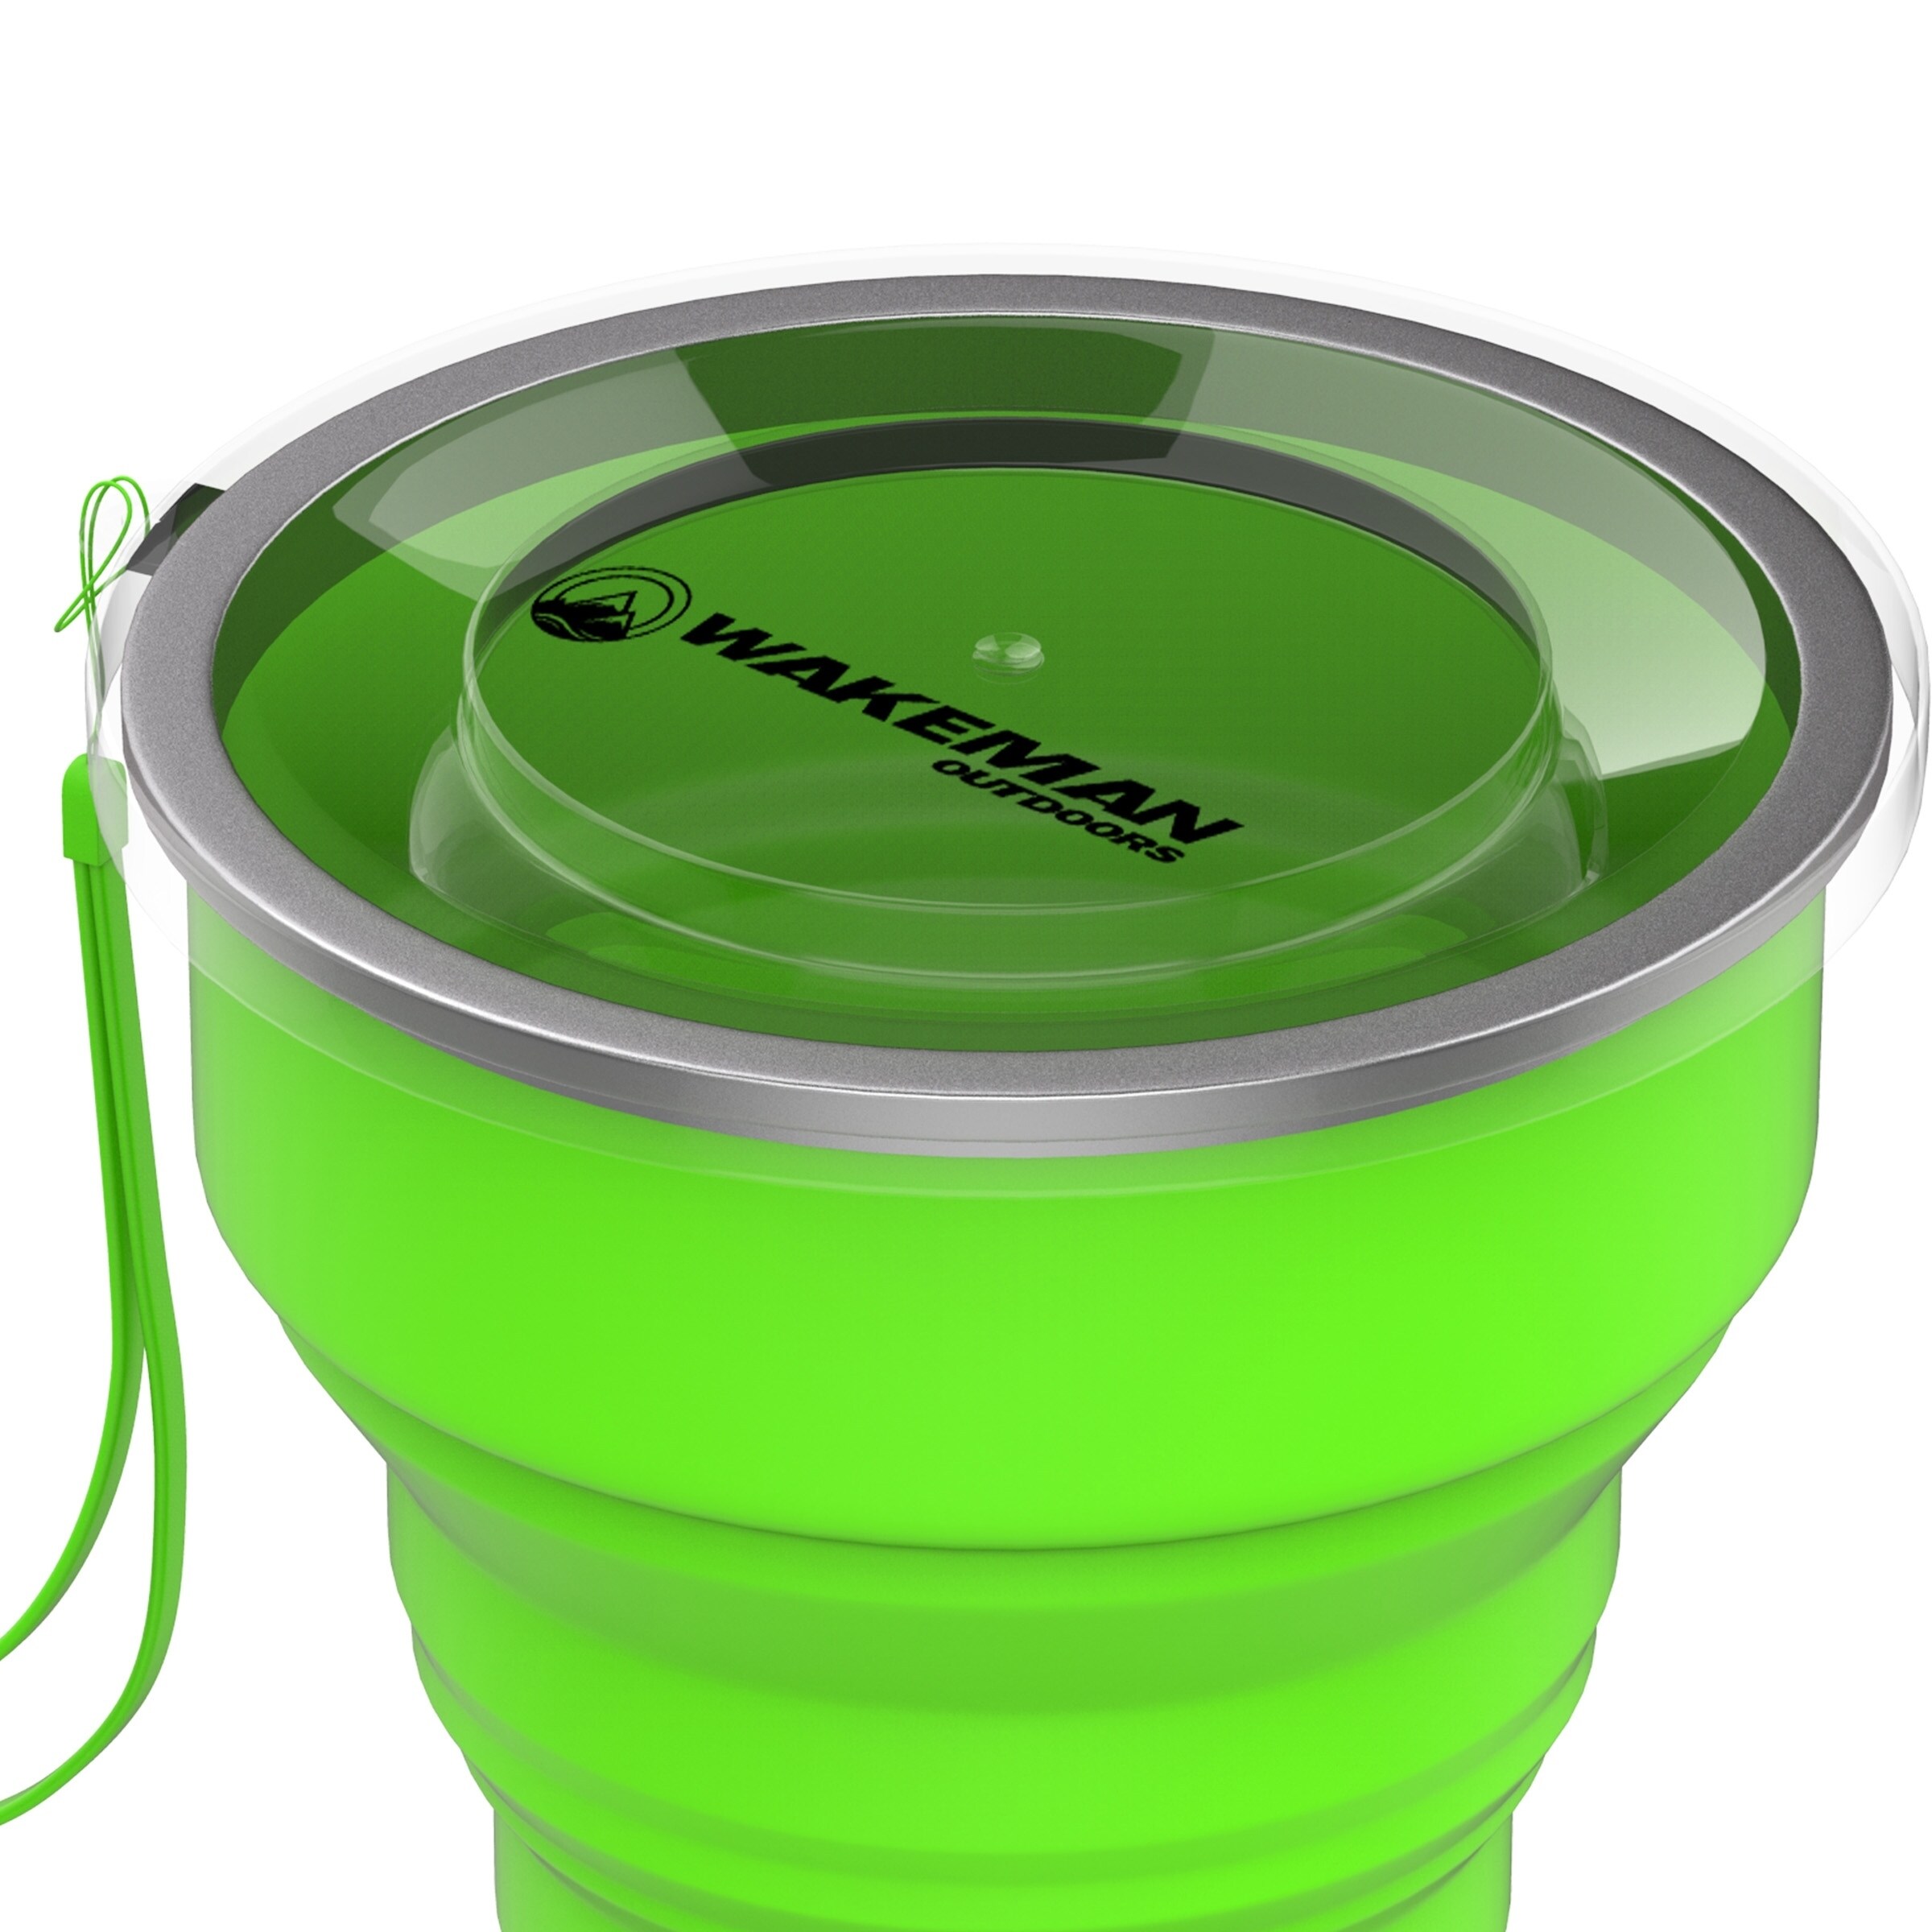 Collapsible Bowls with Lids - BPA Free Silicone, Reusable Food Bowl for  Camping, Travel, Hiking by Wakeman Outdoors - On Sale - Bed Bath & Beyond -  24299676